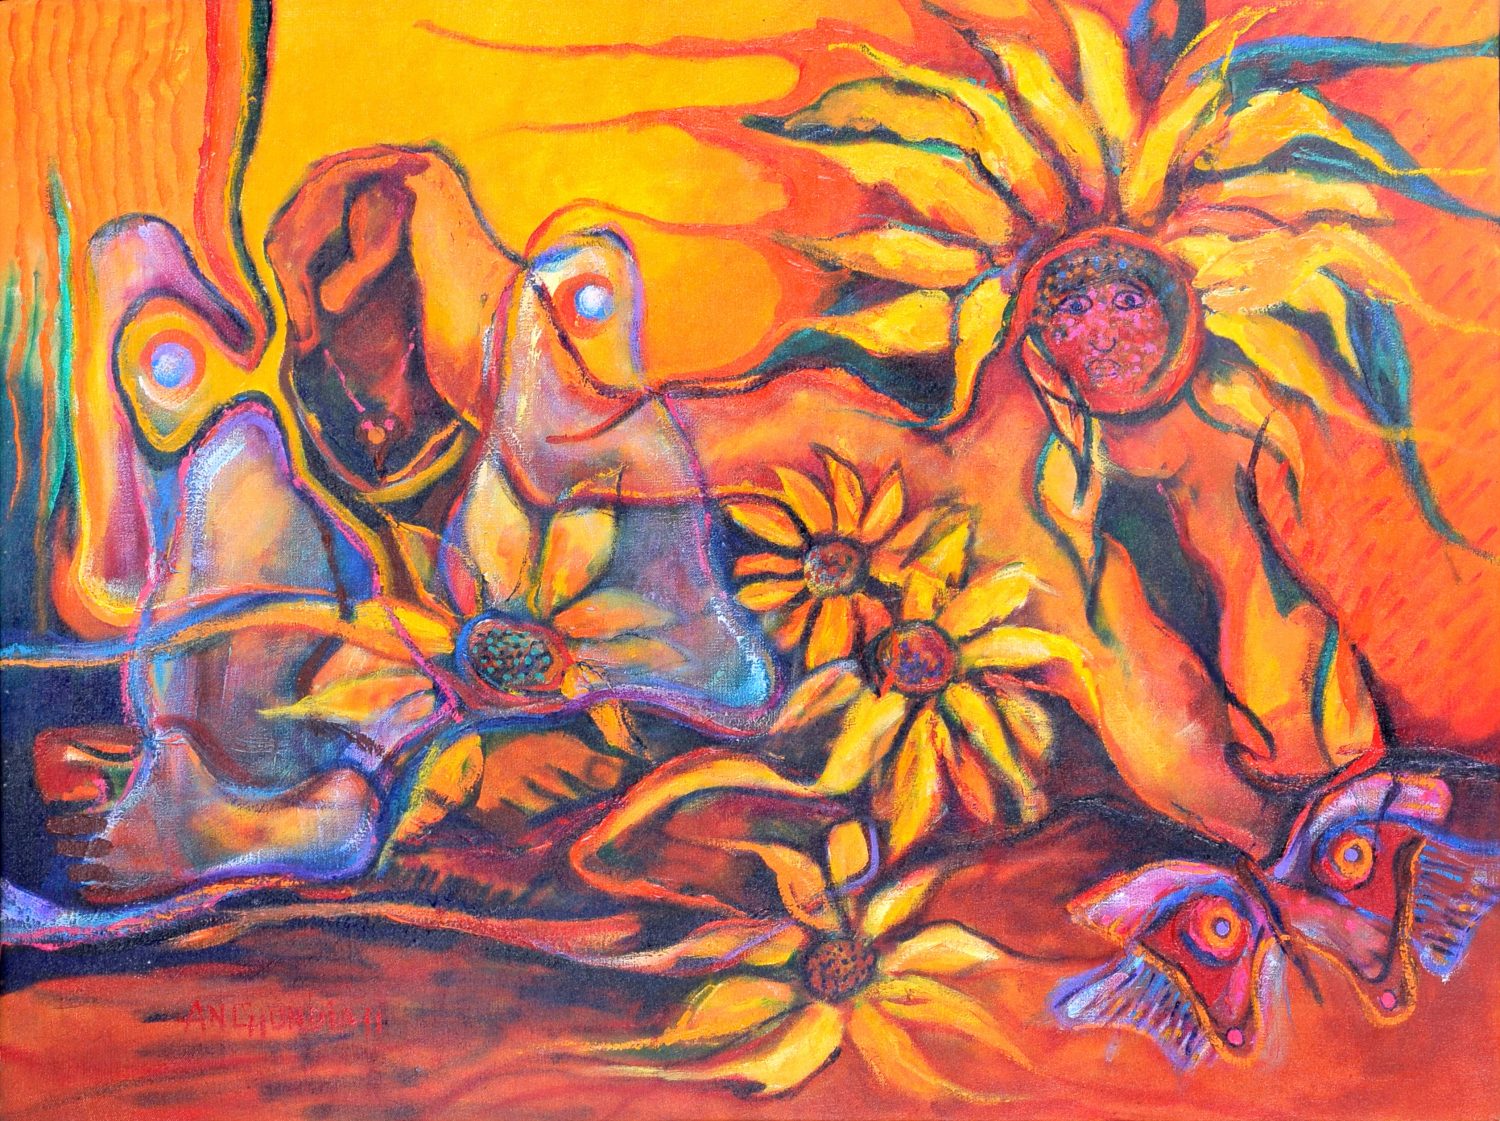 thumbnail of Untitled work by Ecuadorian artist Hector Anchundia. medium: oil on canvas. Dimensions: 23 x 31 inches. date: 1995